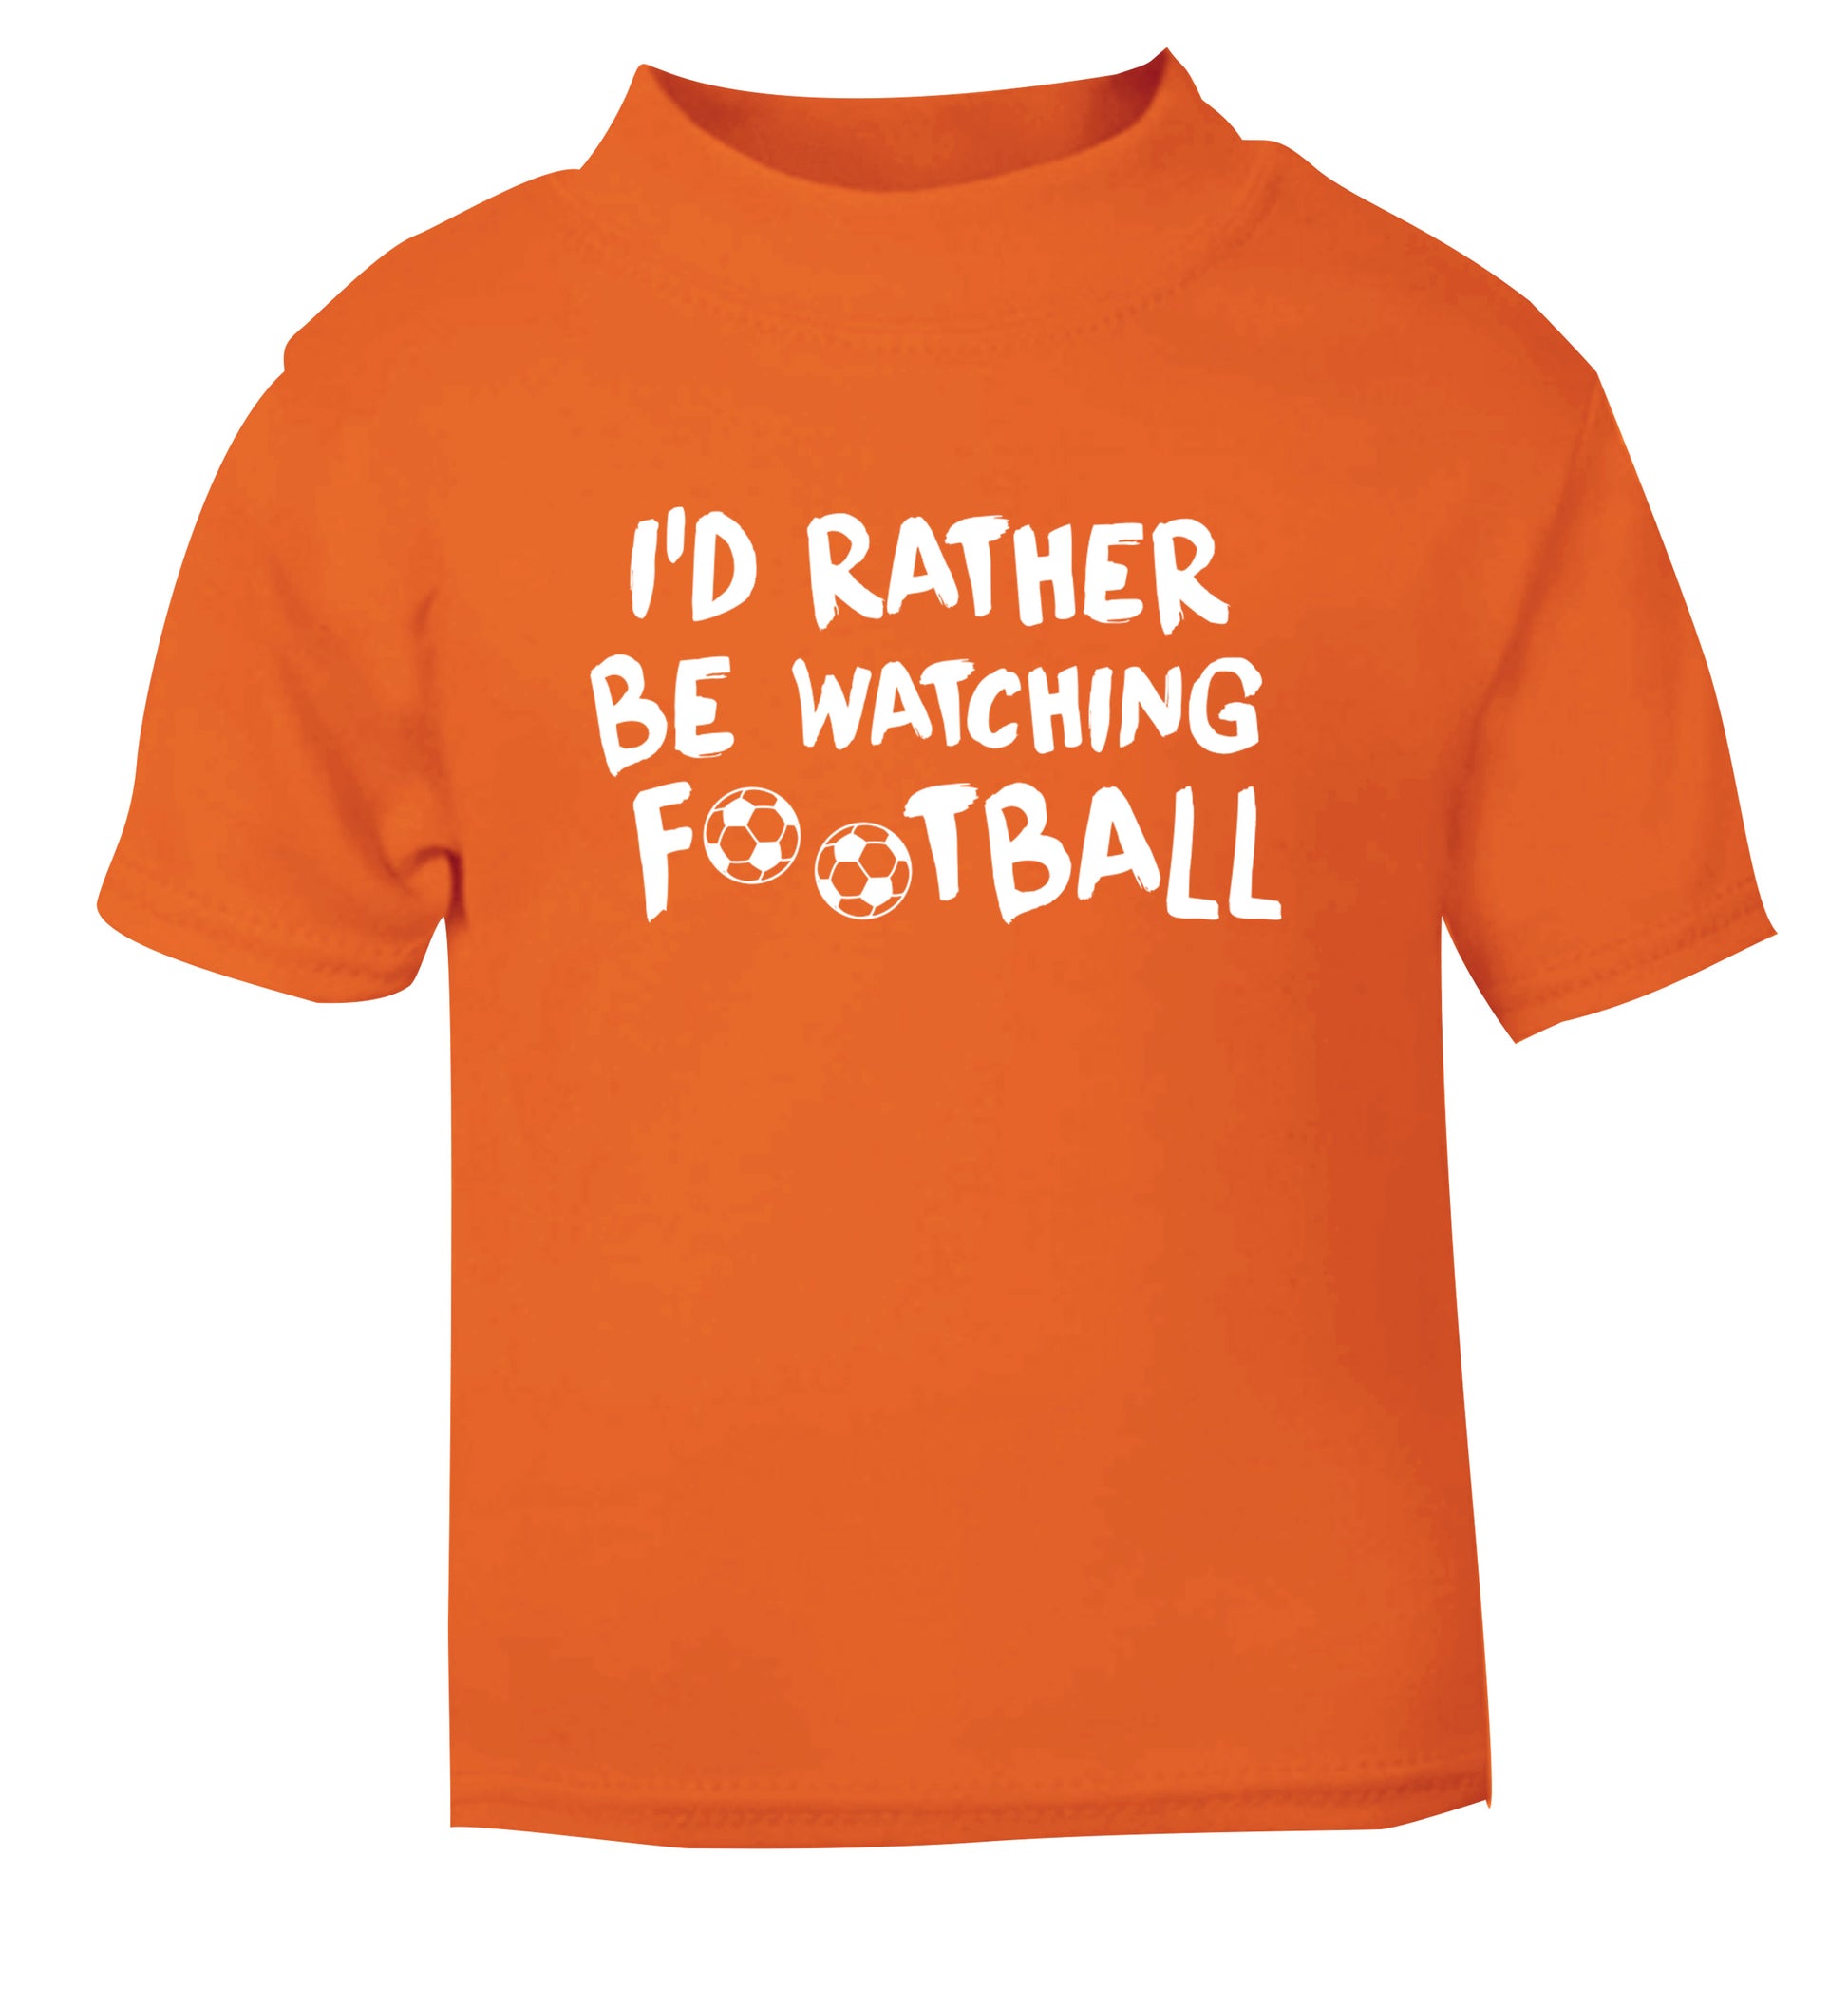 I'd rather be watching football orange Baby Toddler Tshirt 2 Years